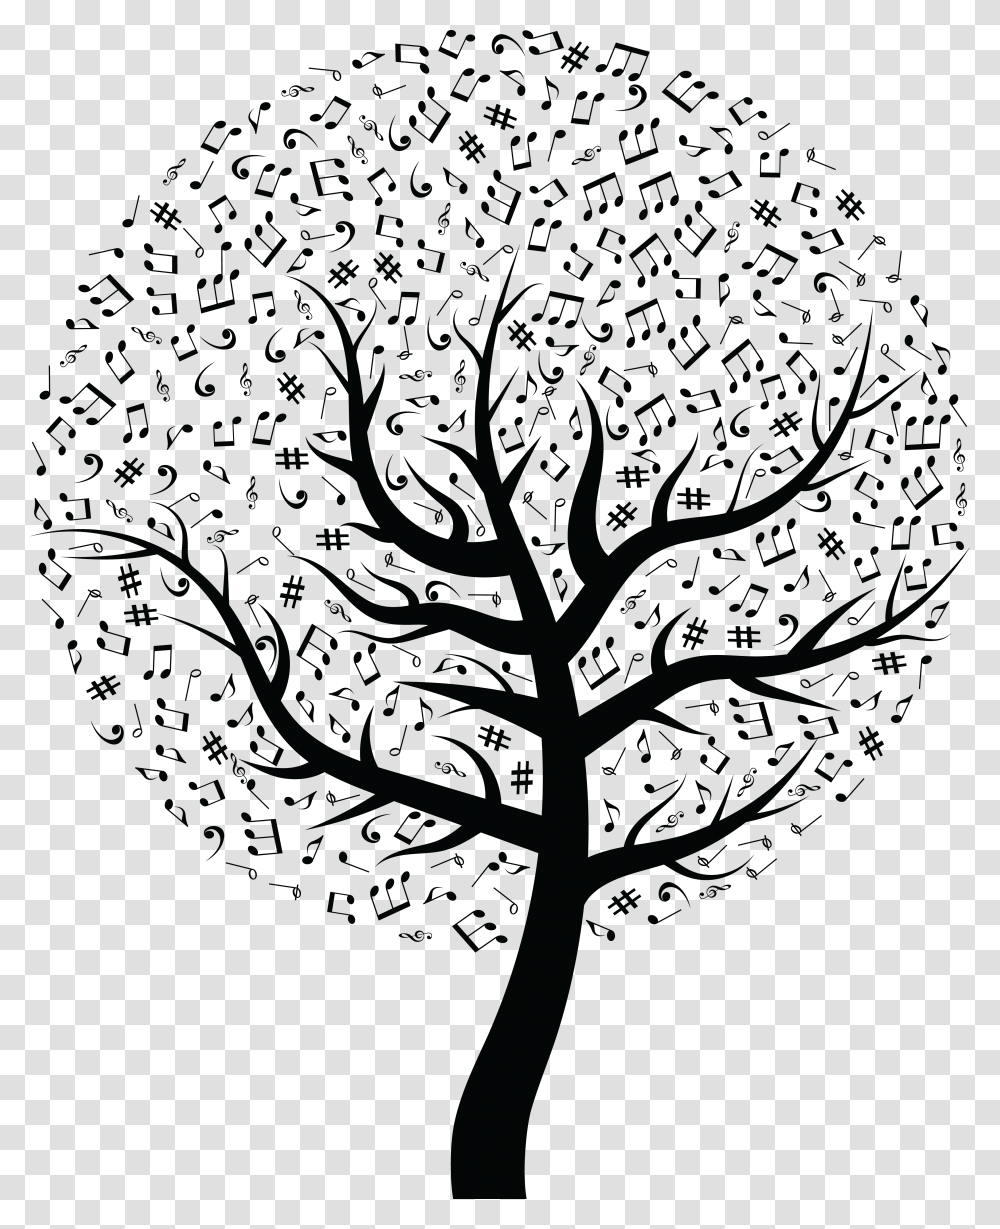 Music Tree Clip Arts Tree Designs On Wall, Plant, Pattern, Silhouette, Tree Trunk Transparent Png